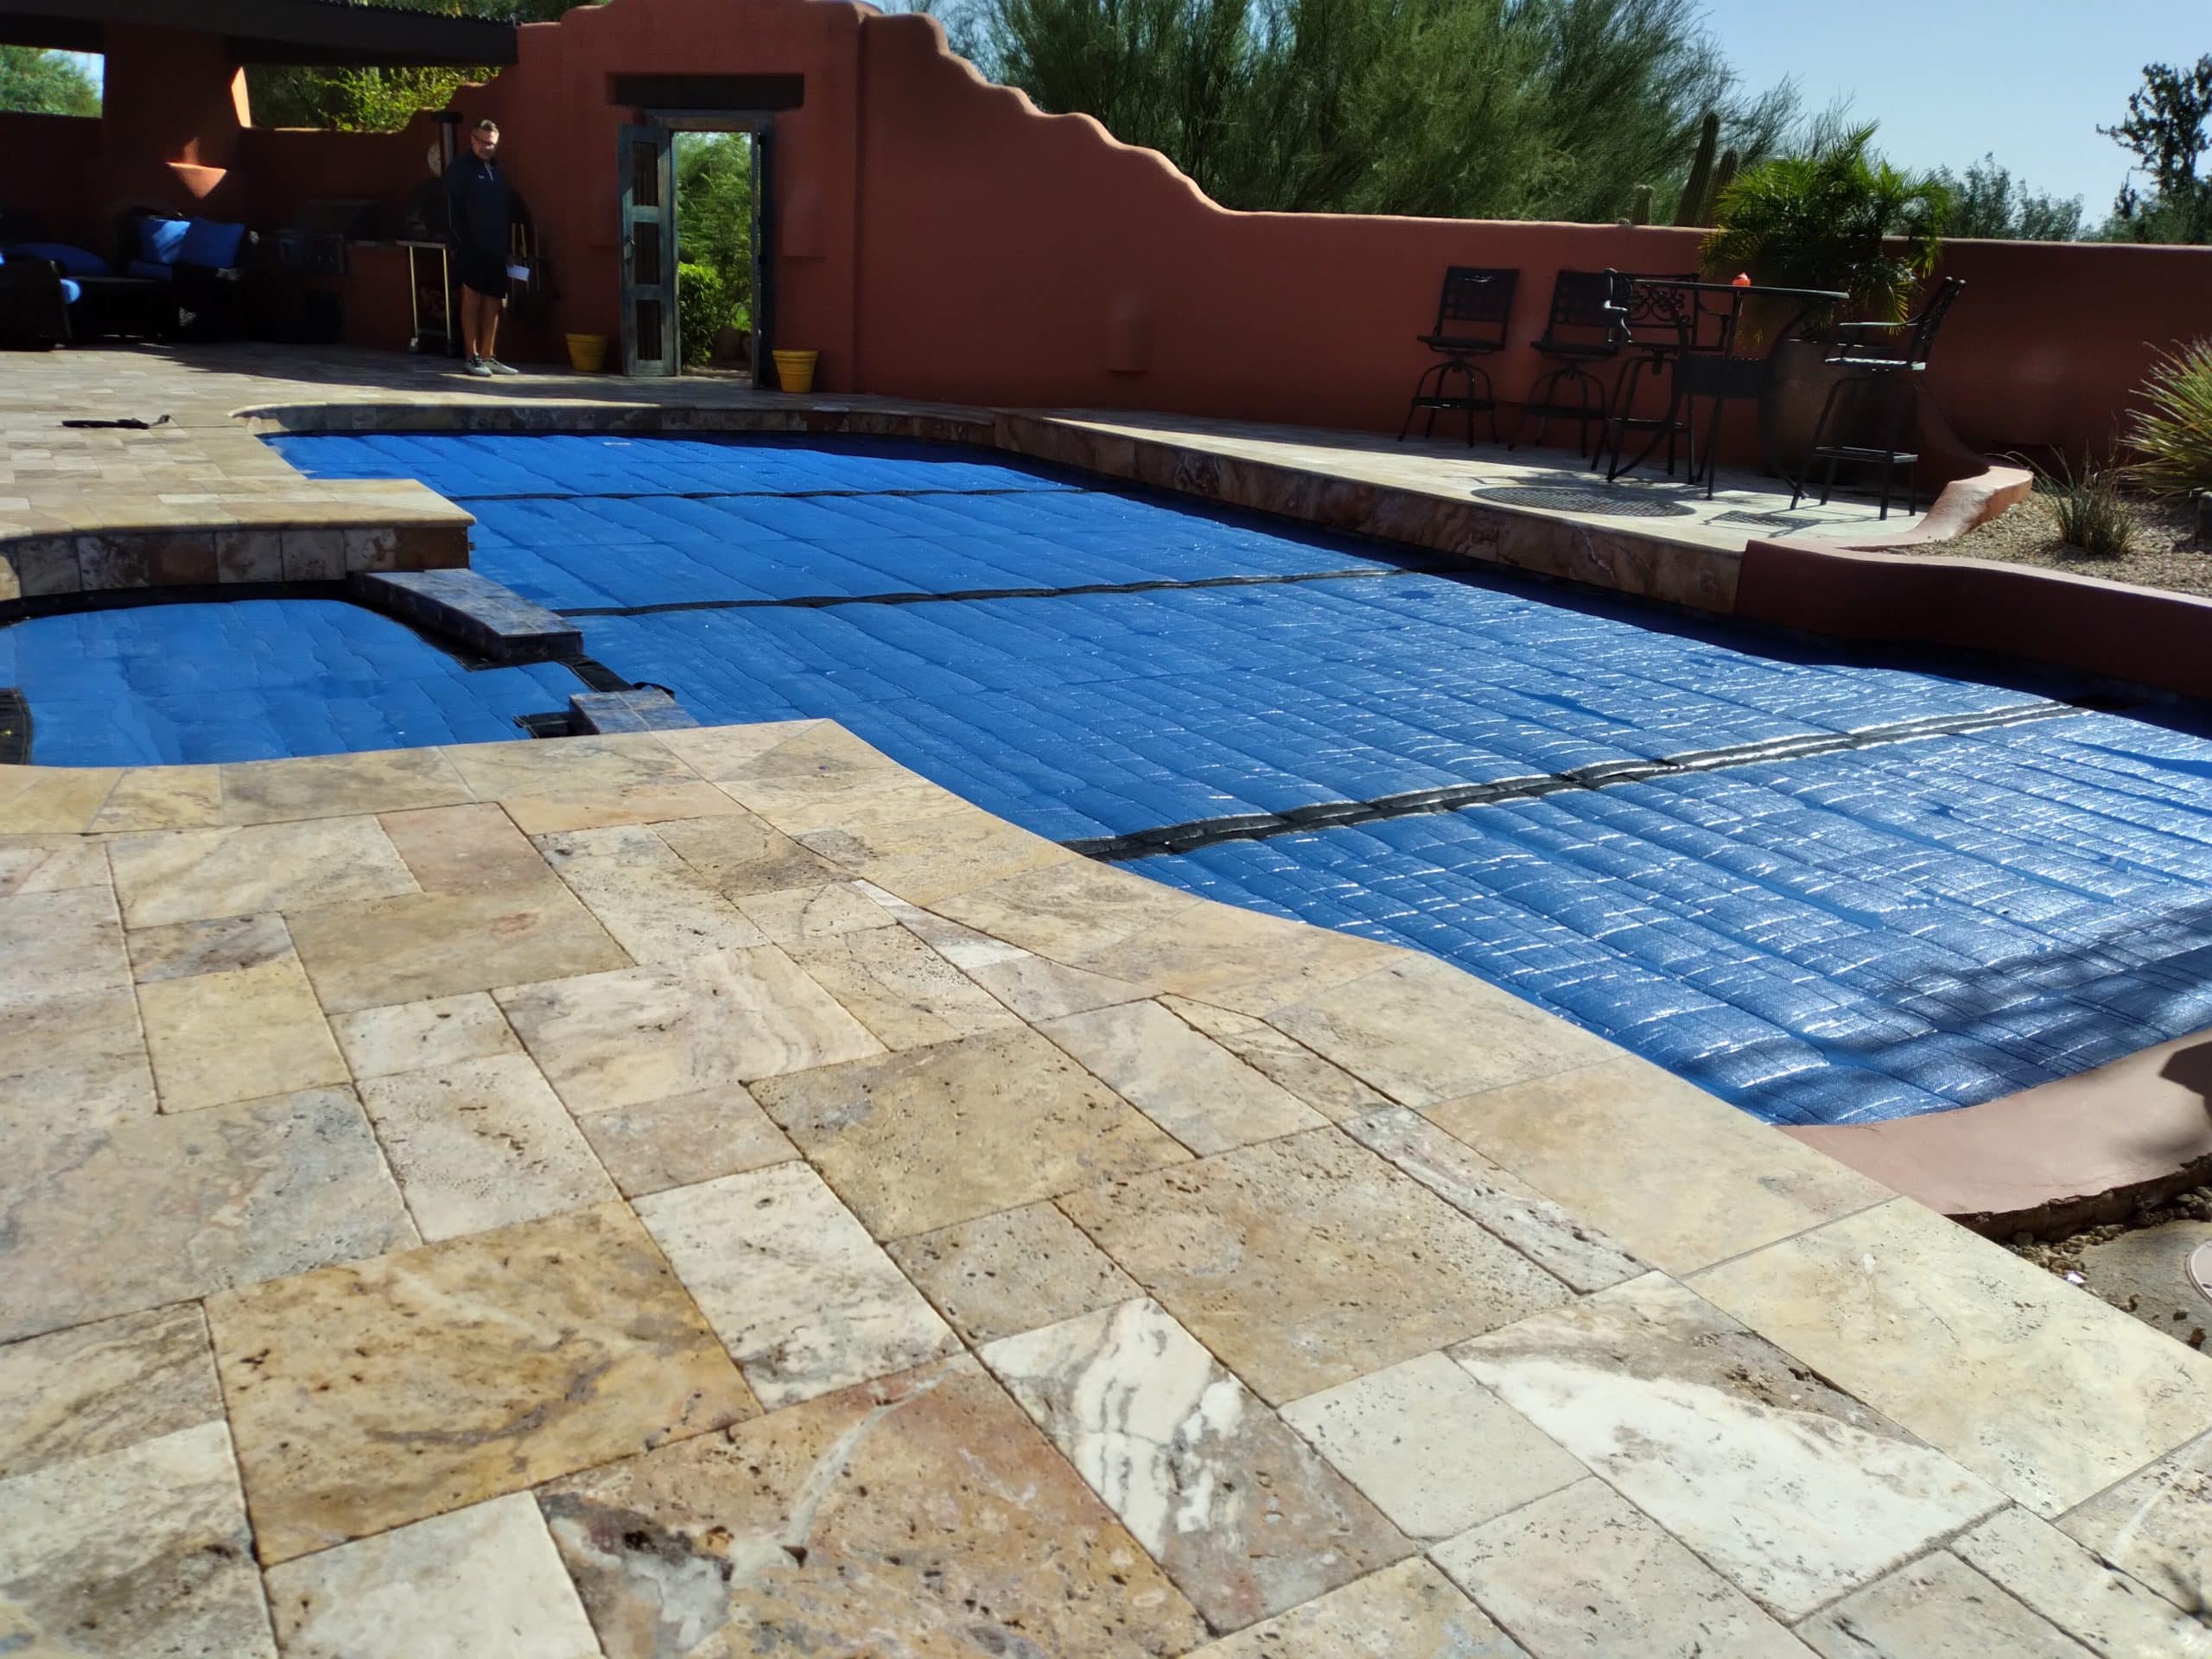 Thermal Pool Cover (Heatsaver) With Sections